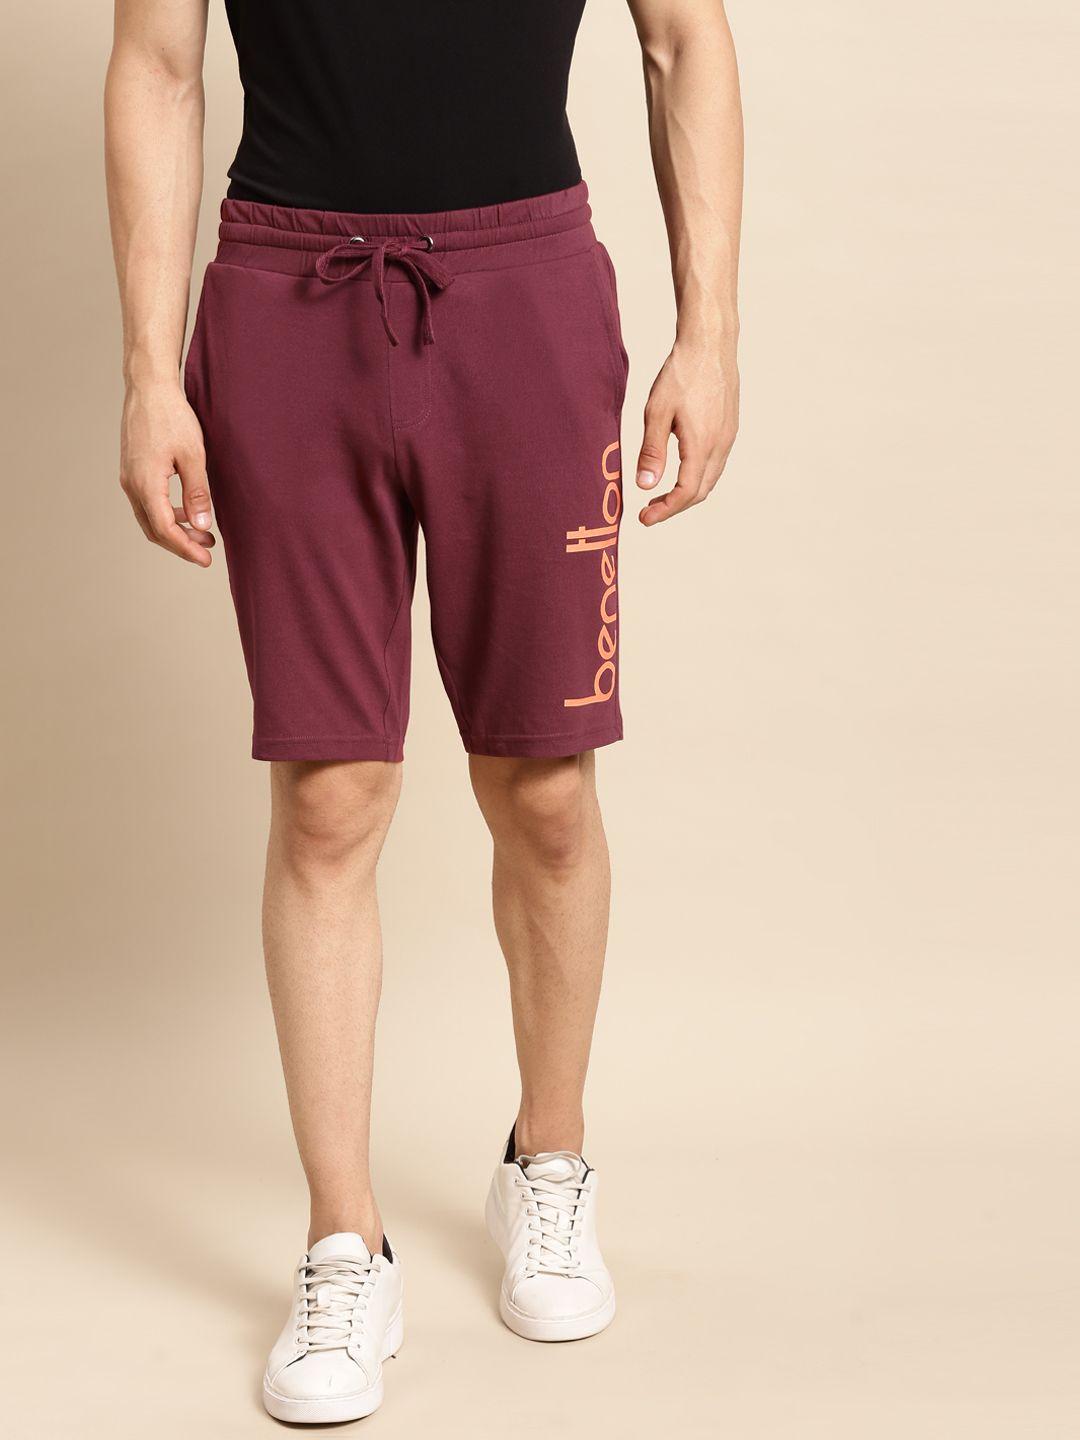 united colors of benetton men maroon brand logo printed pure cotton shorts